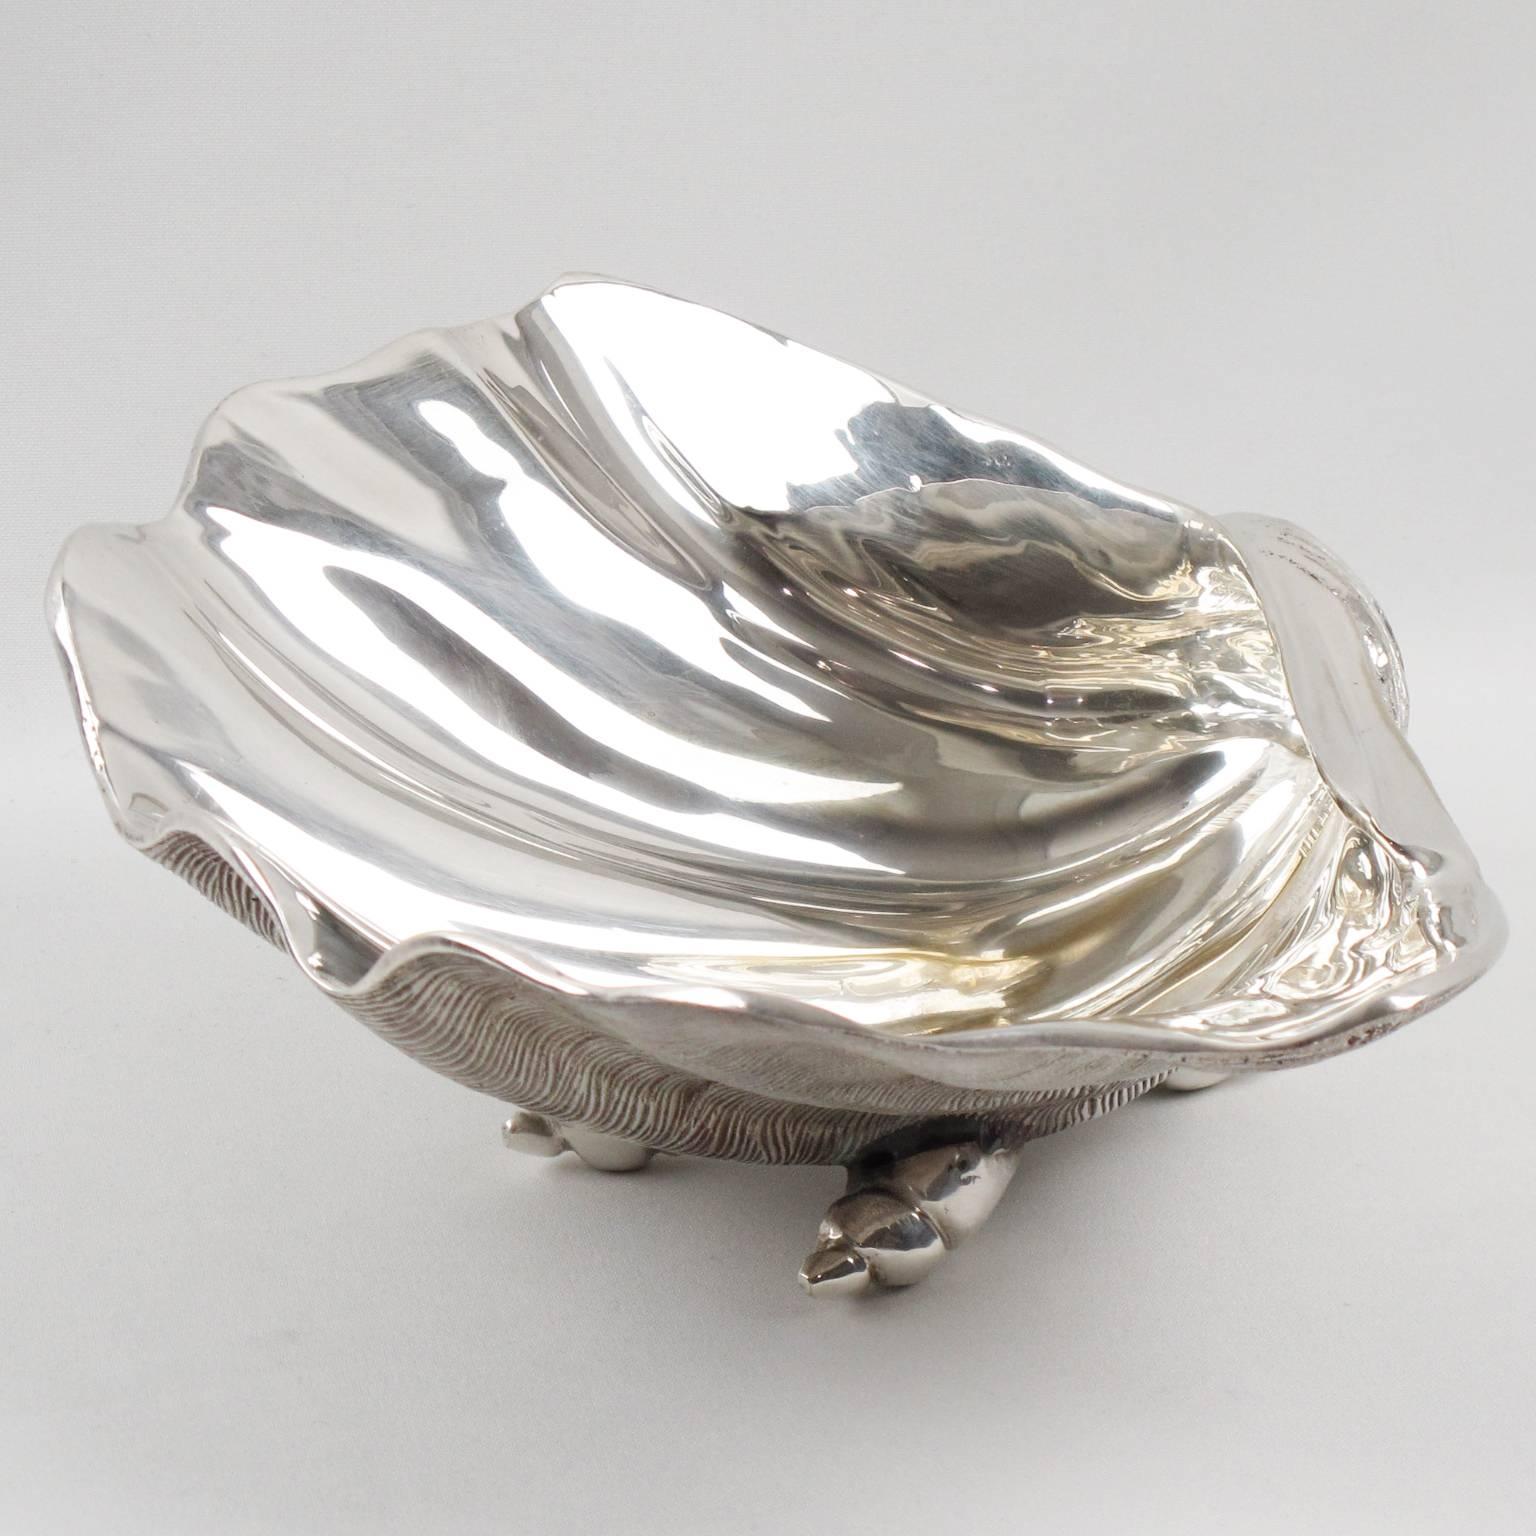 Italian 1970s Silver Plate Large Clam Shell Bowl Catchall 1